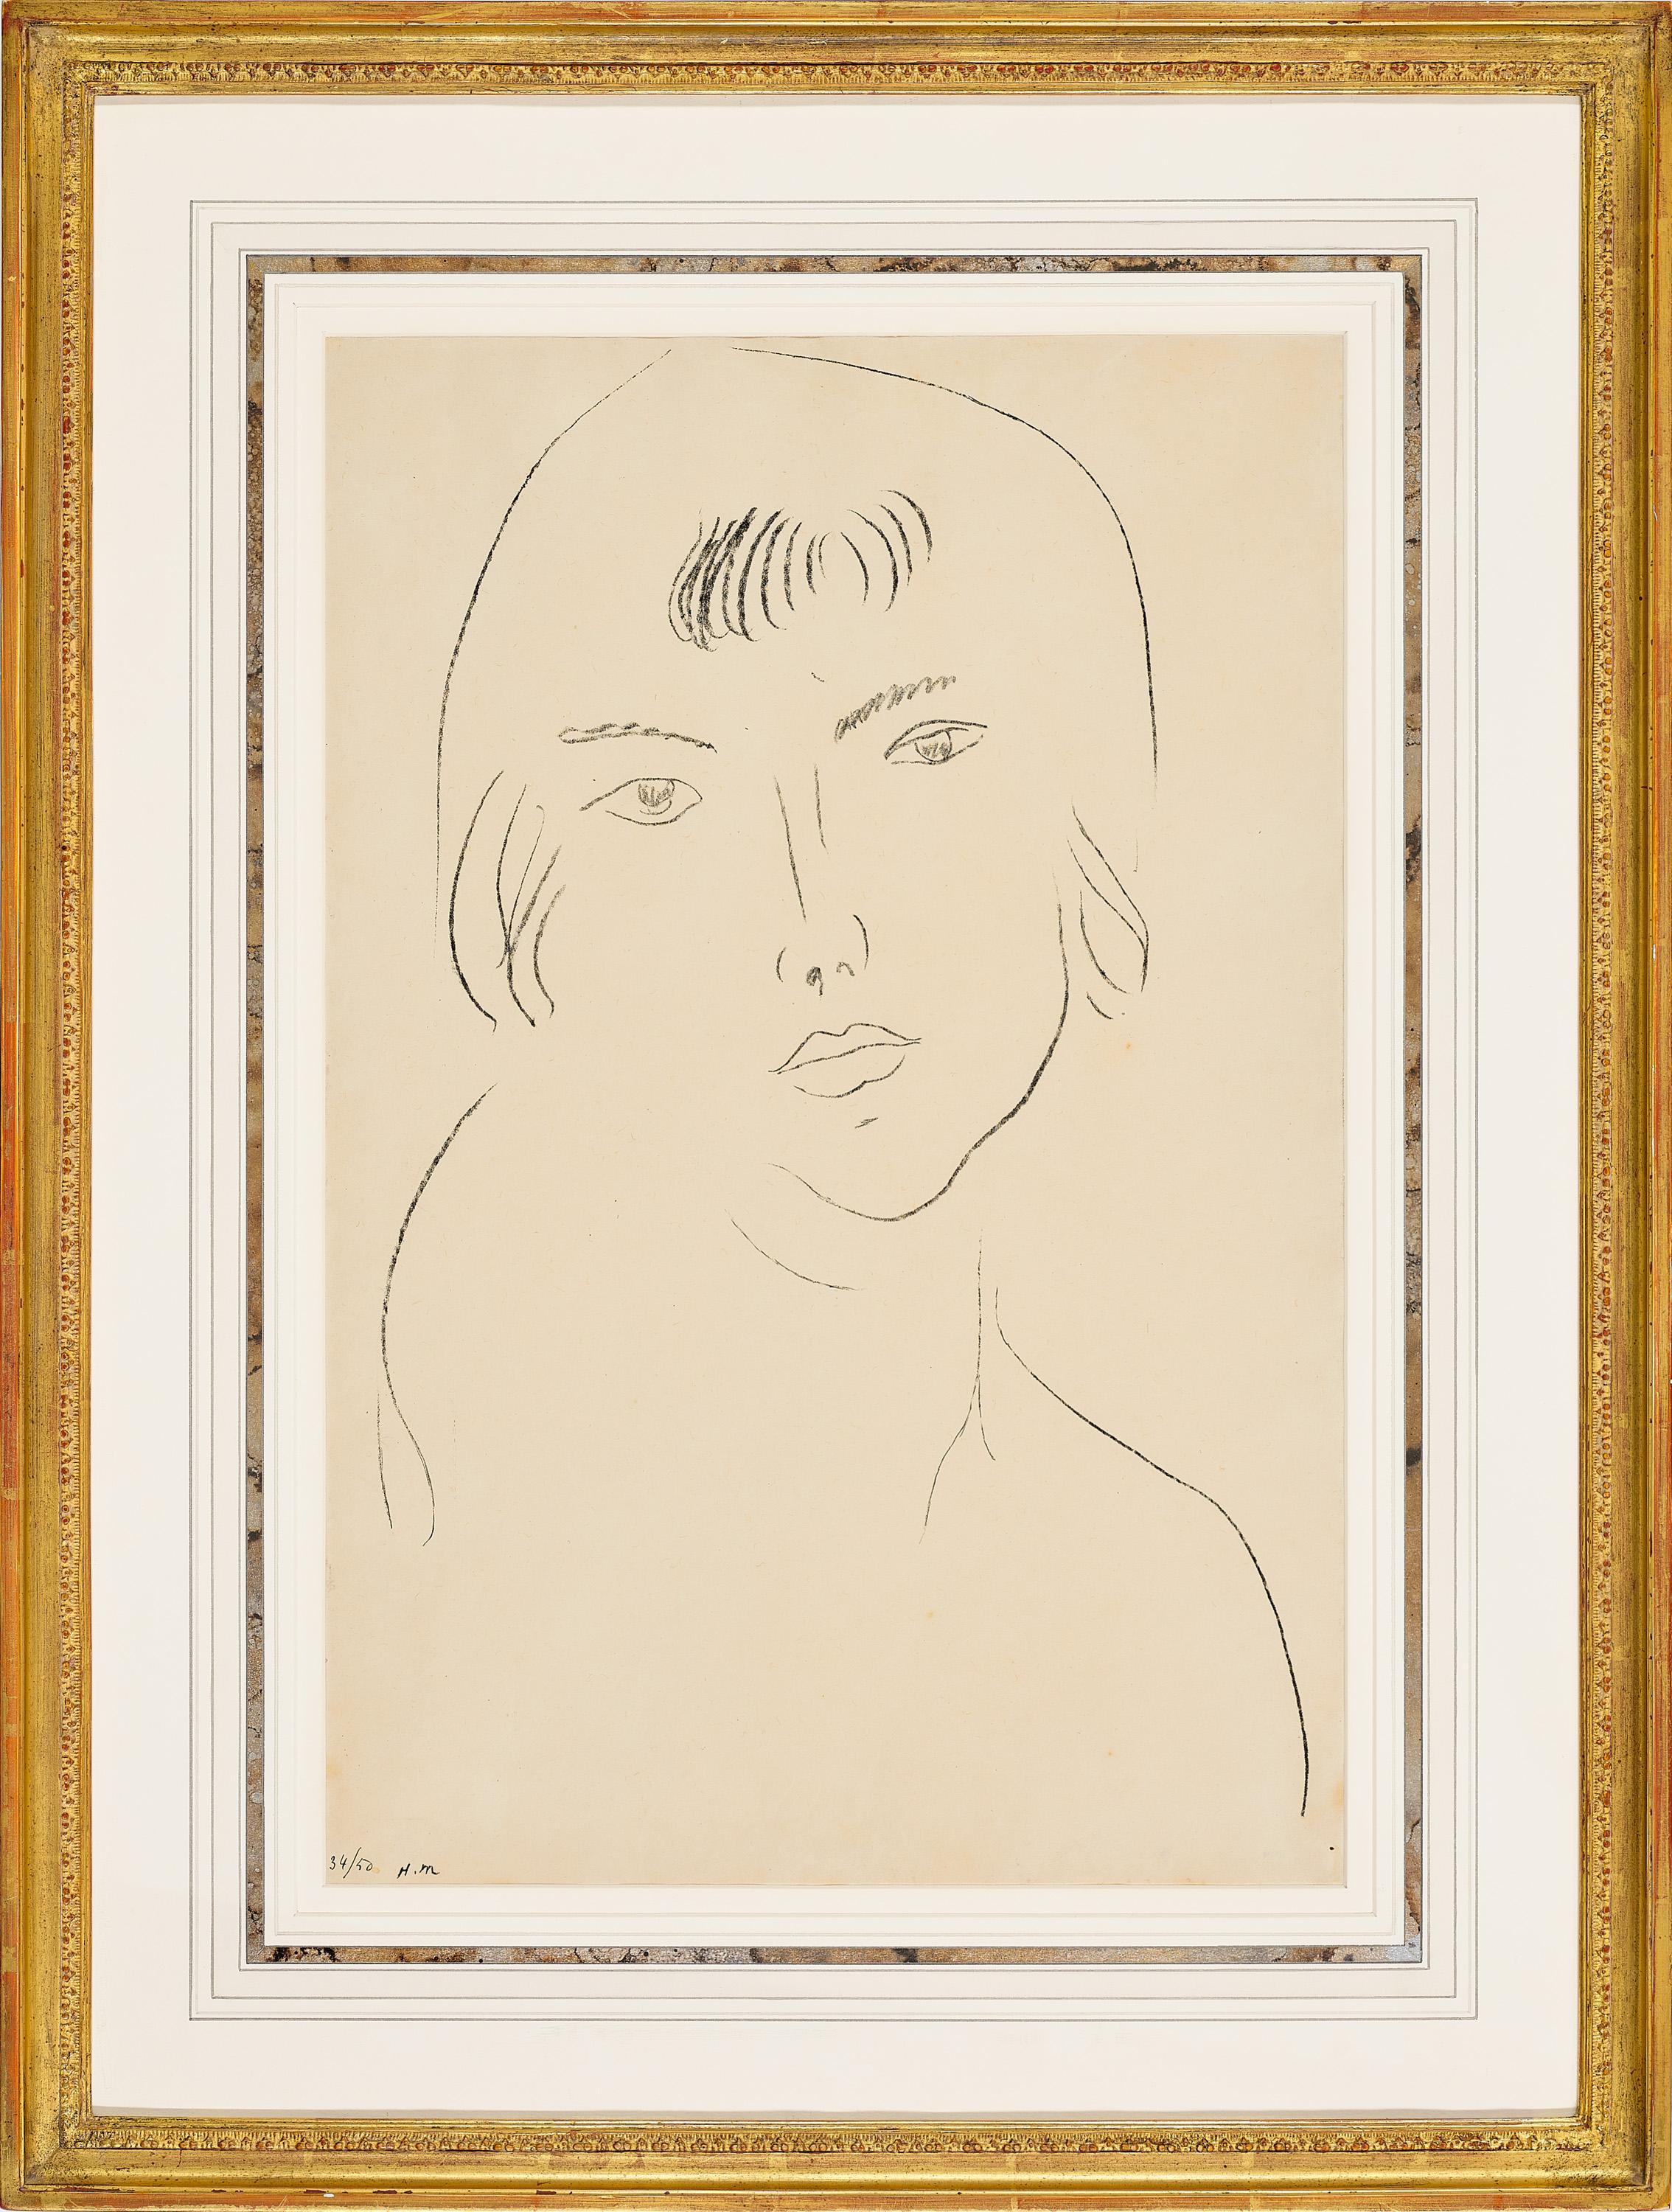 Henri Matisse 
Visage À La Frange, 1913
lithograph on japon paper
Edition: 34/50
Hand signed with initials and numbered below the image
Image size 49.0 x 32.5 cm 
Frame size 70.0 x 53.0 cm 

LITERATURE
Duthuit-Matisse, M. and Duthuit, C., Henri